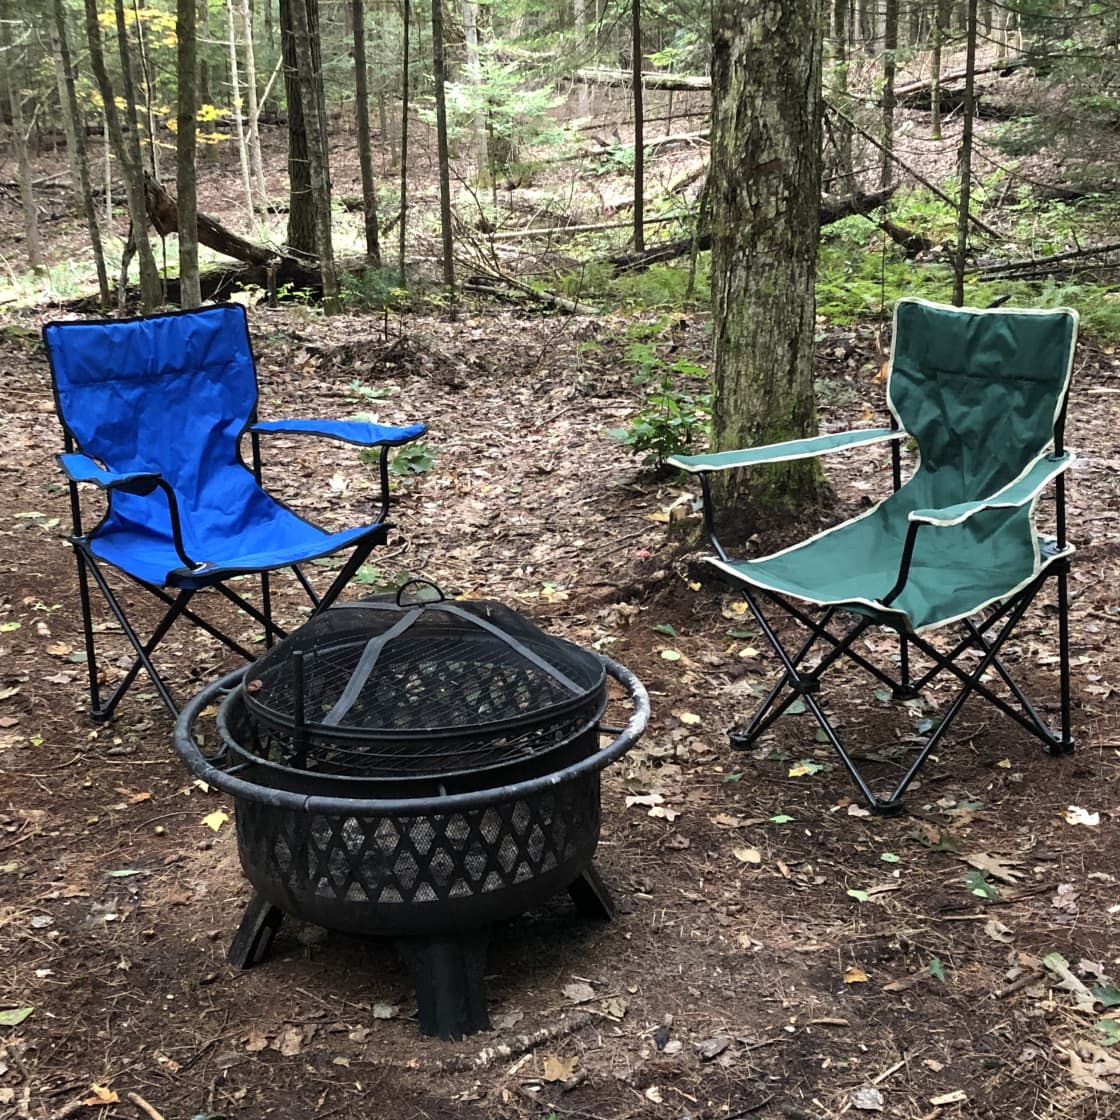 Each campsite has two chairs and a firepit with a grill.